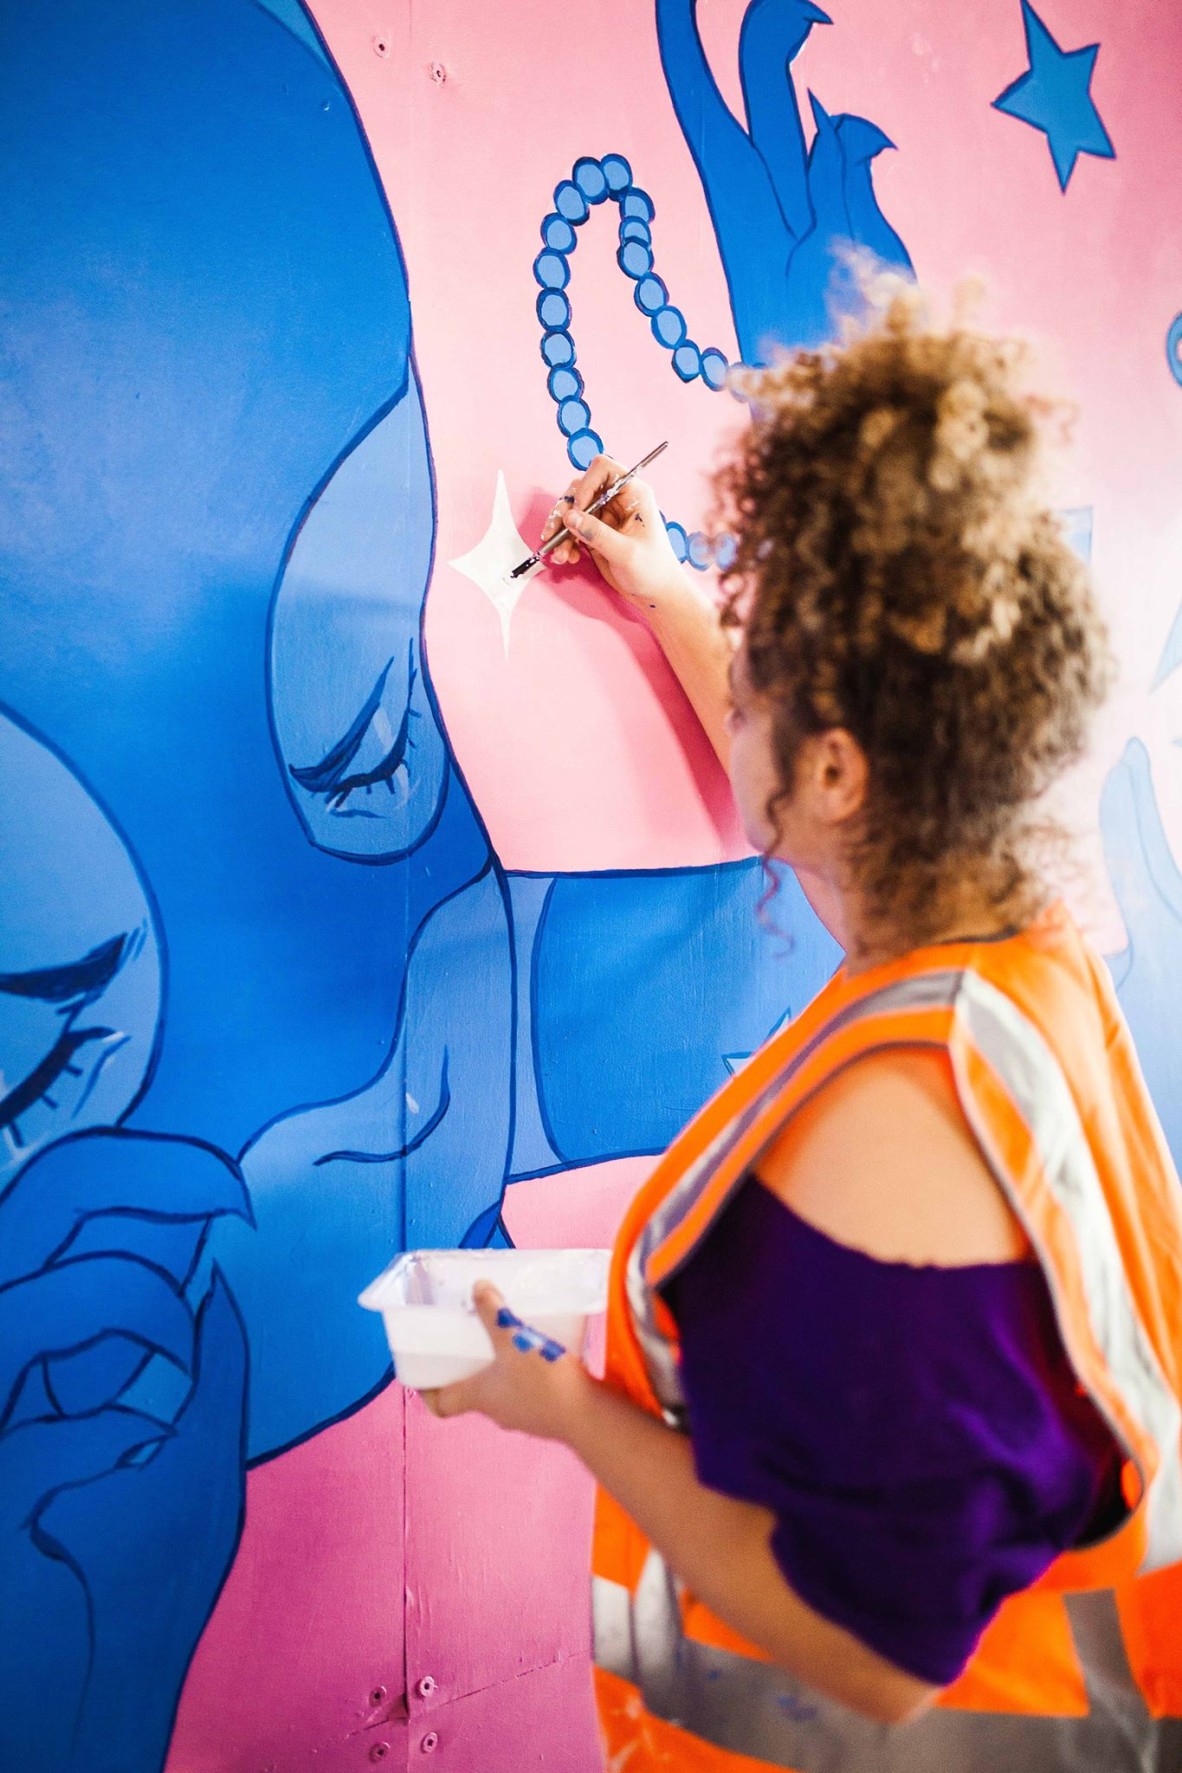 Tori-Jay Mordey wears a high vis vest and a purple shirt She is standing side on painting a blue and pink mural